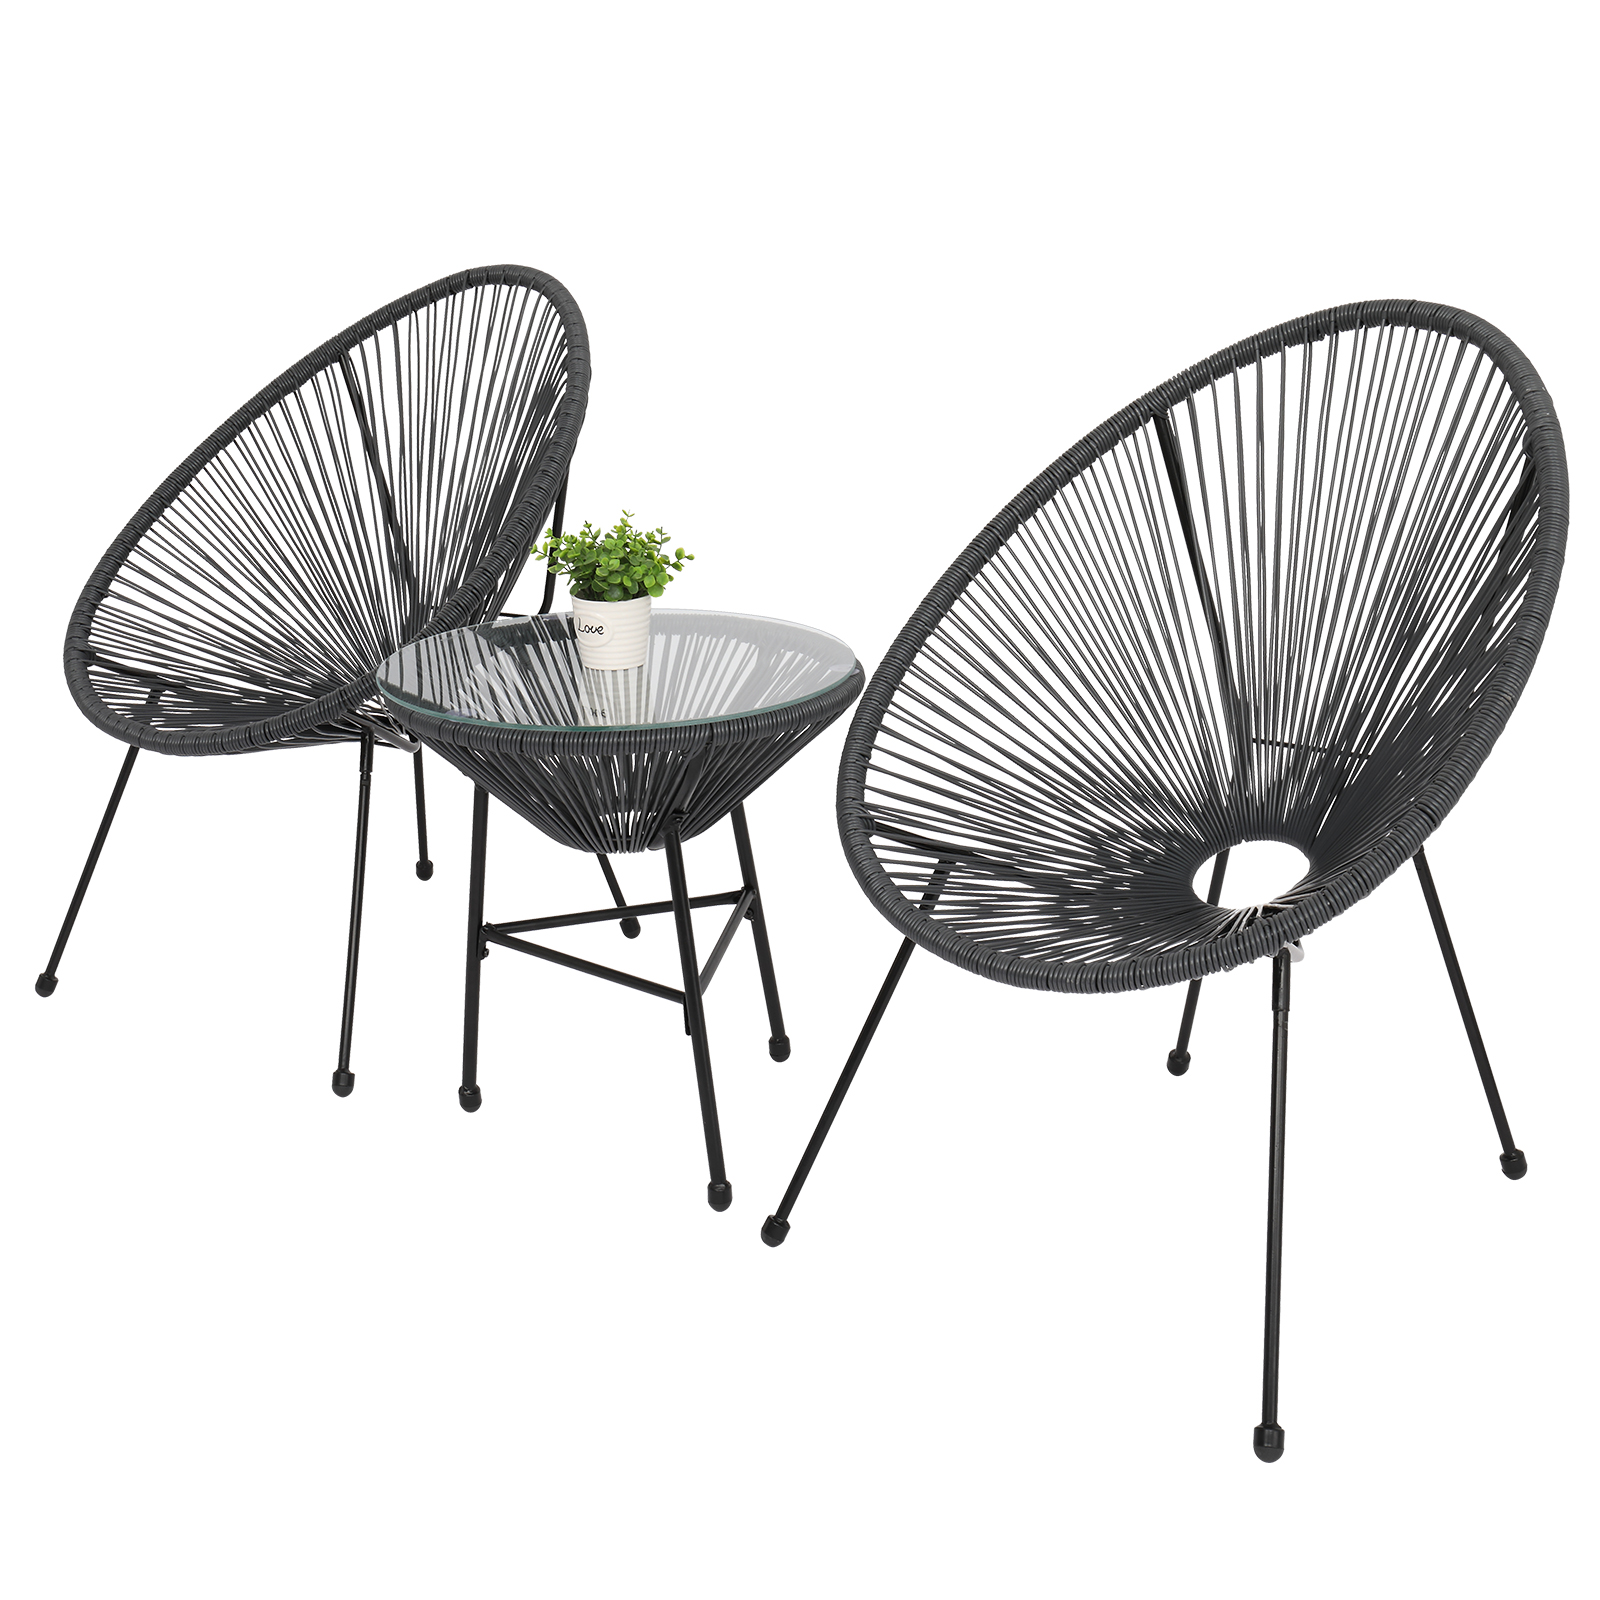 Acapulco Chair Set, BTMWAY 3 Piece Wicker Bistro Set with 2 Oval Chairs and Coffee Table, Outdoor Patio Furniture Sets for Garden, All-Weather Chaise Lounge Conversation Set, Balcony Furniture, Gray - image 5 of 15